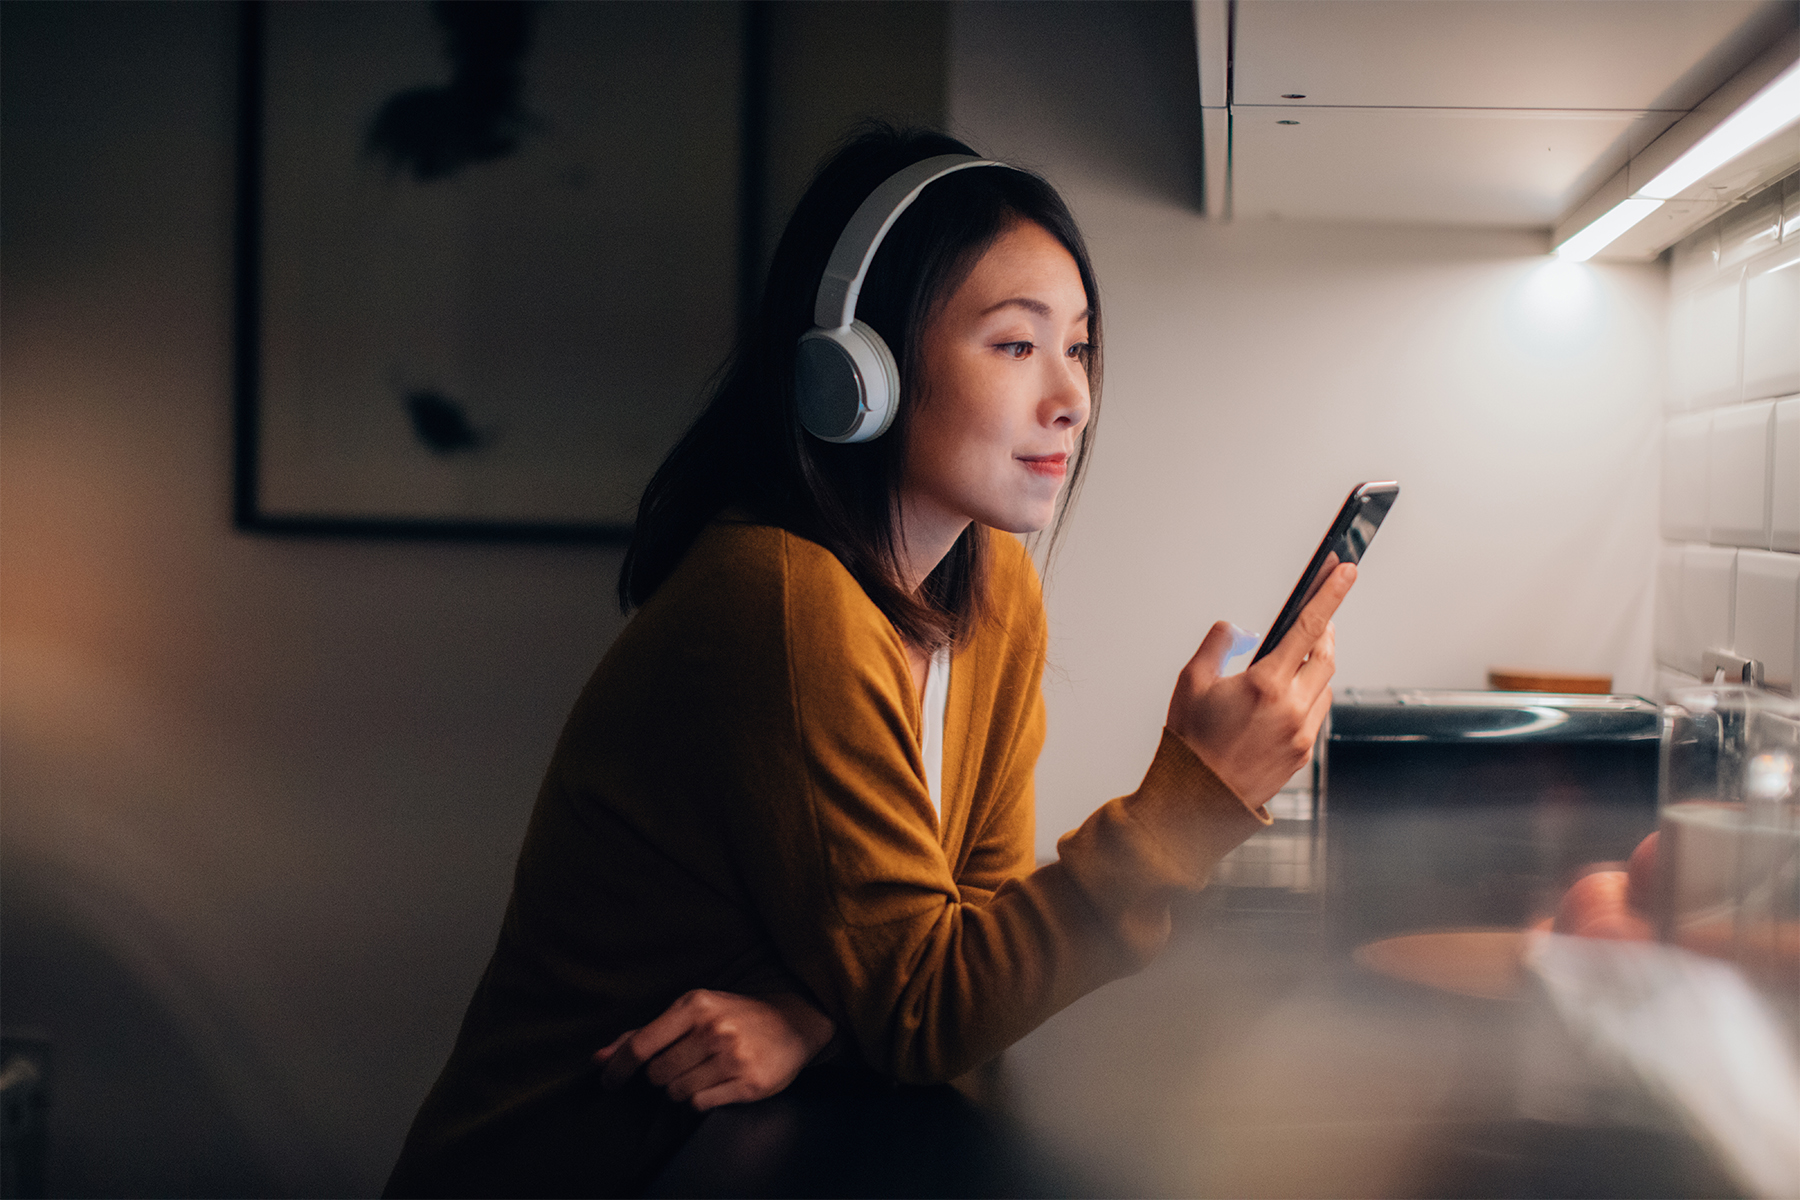 Young Woman With Bluetooth Headphones Listening To Music On Smartphone